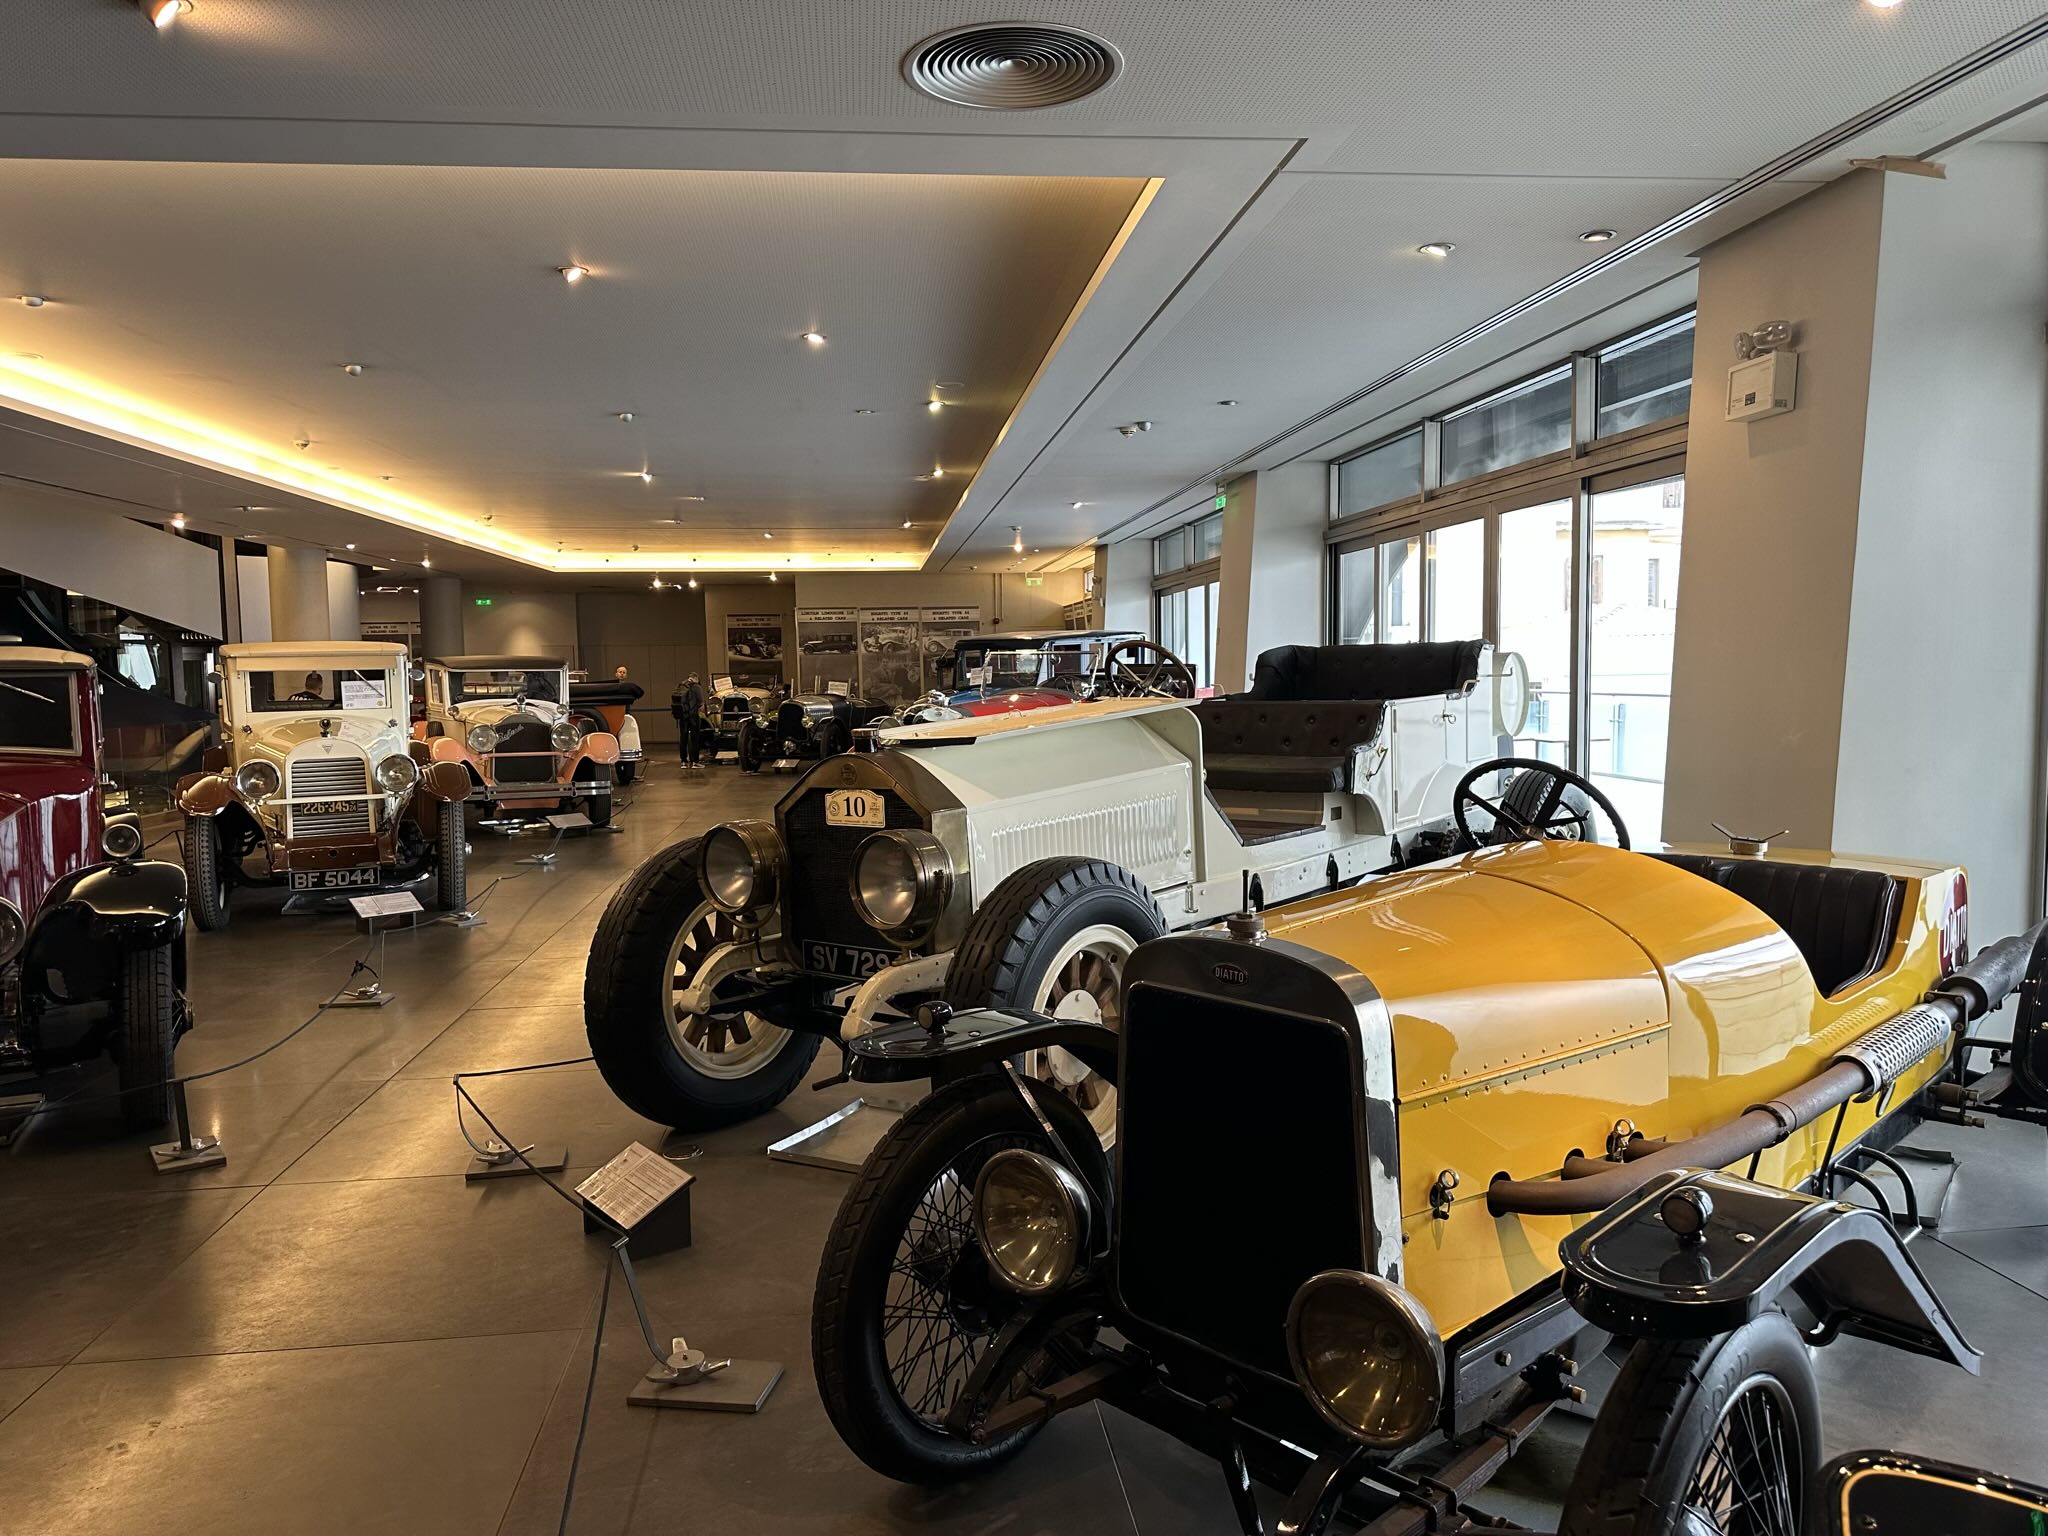 There were many convertibles and roadsters in the Hellenic Motor Museum.